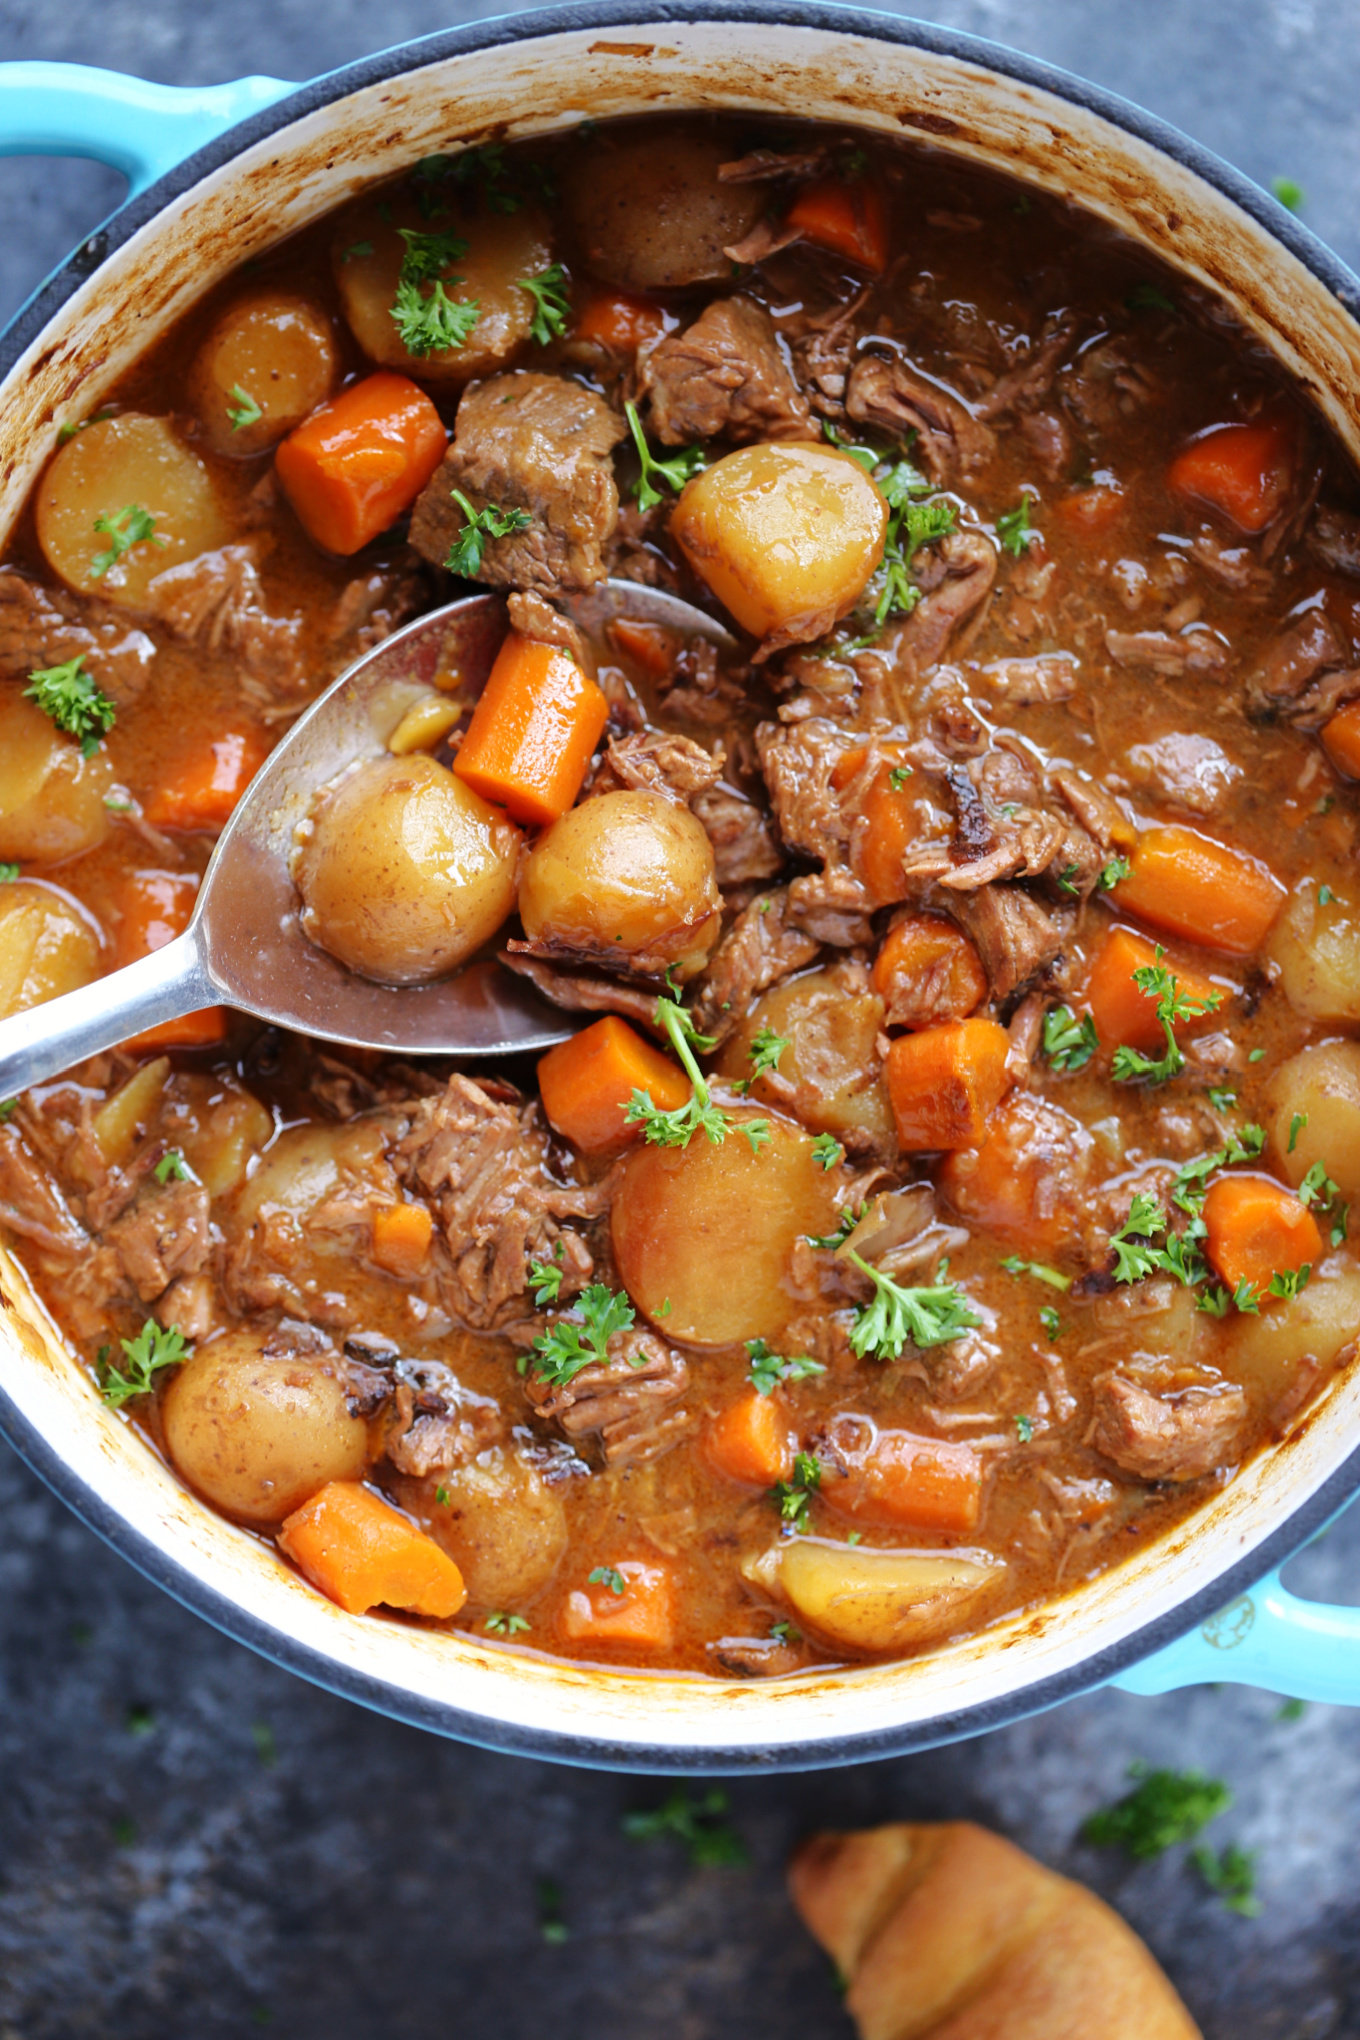 Guinness Beef Stew - Cravings of a Lunatic